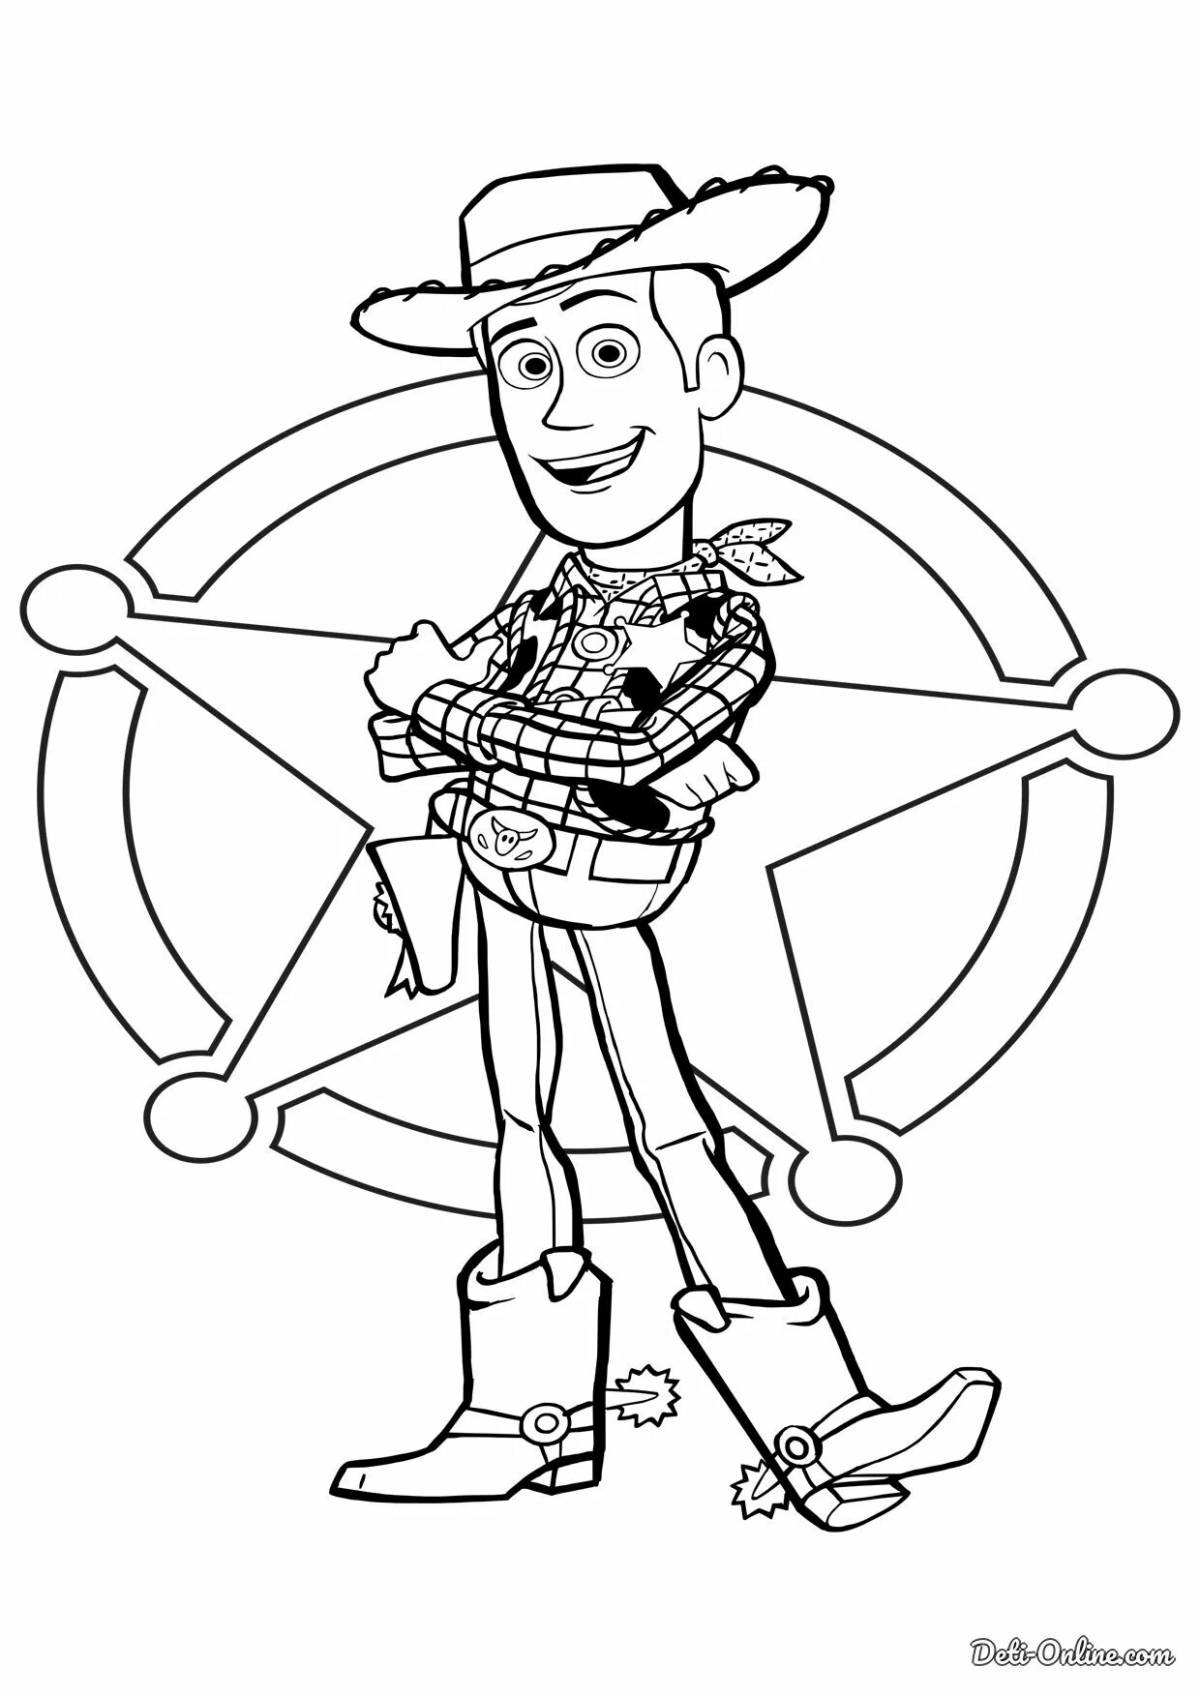 Color-fun andy coloring page